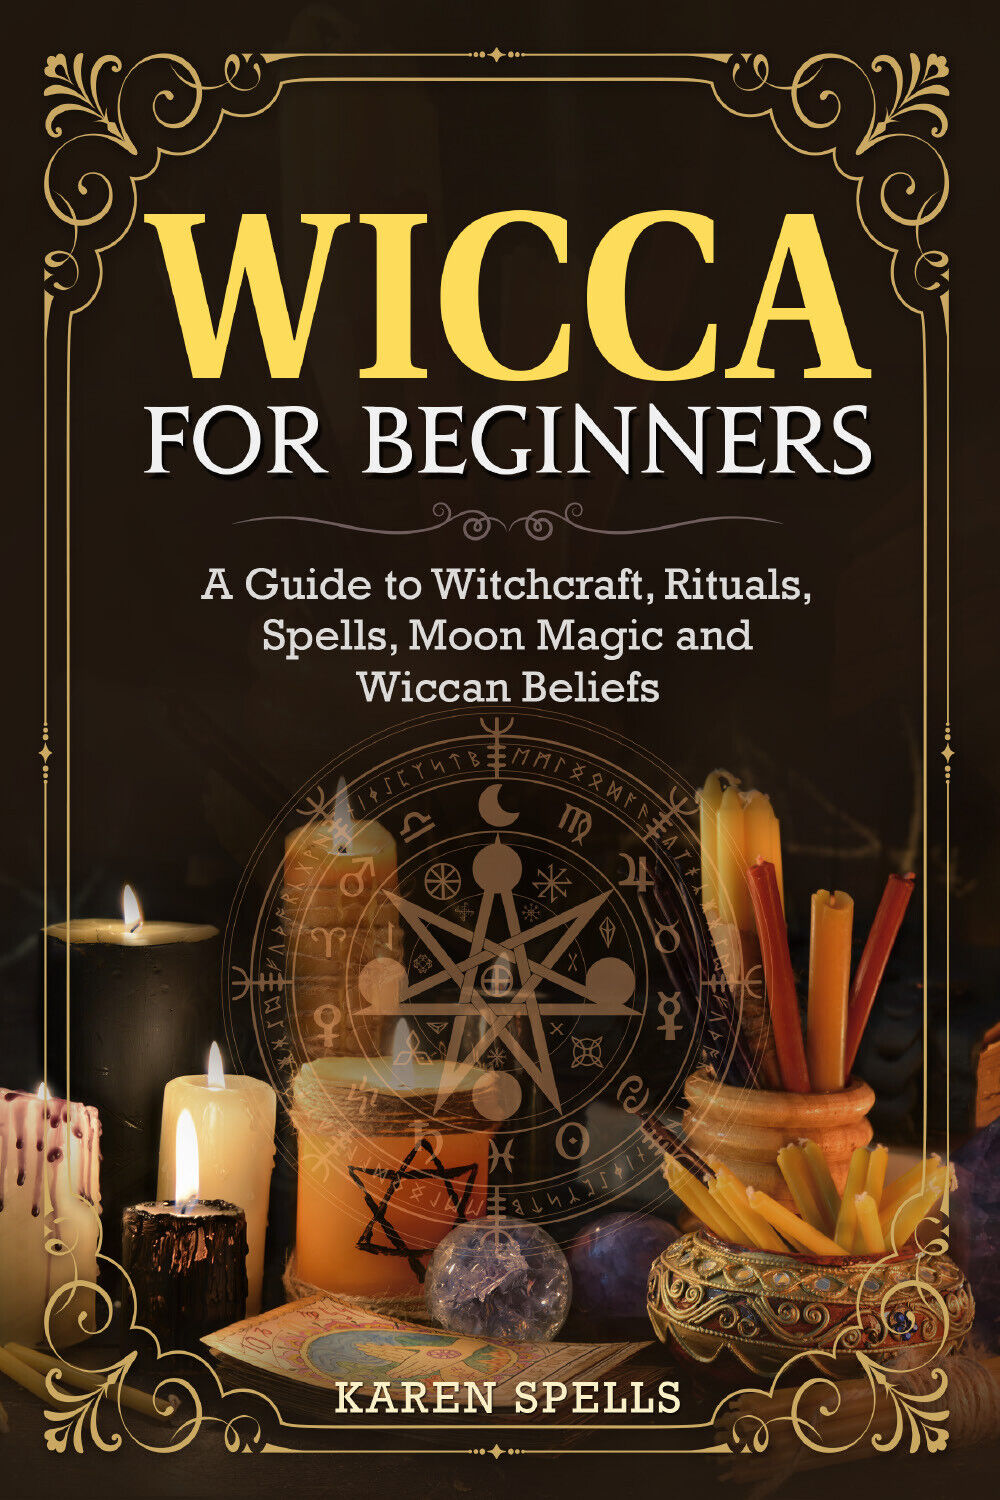 Wicca for Beginners. A Guide to Witchcraft, Rituals, Spells, Moon Magic and Wicc